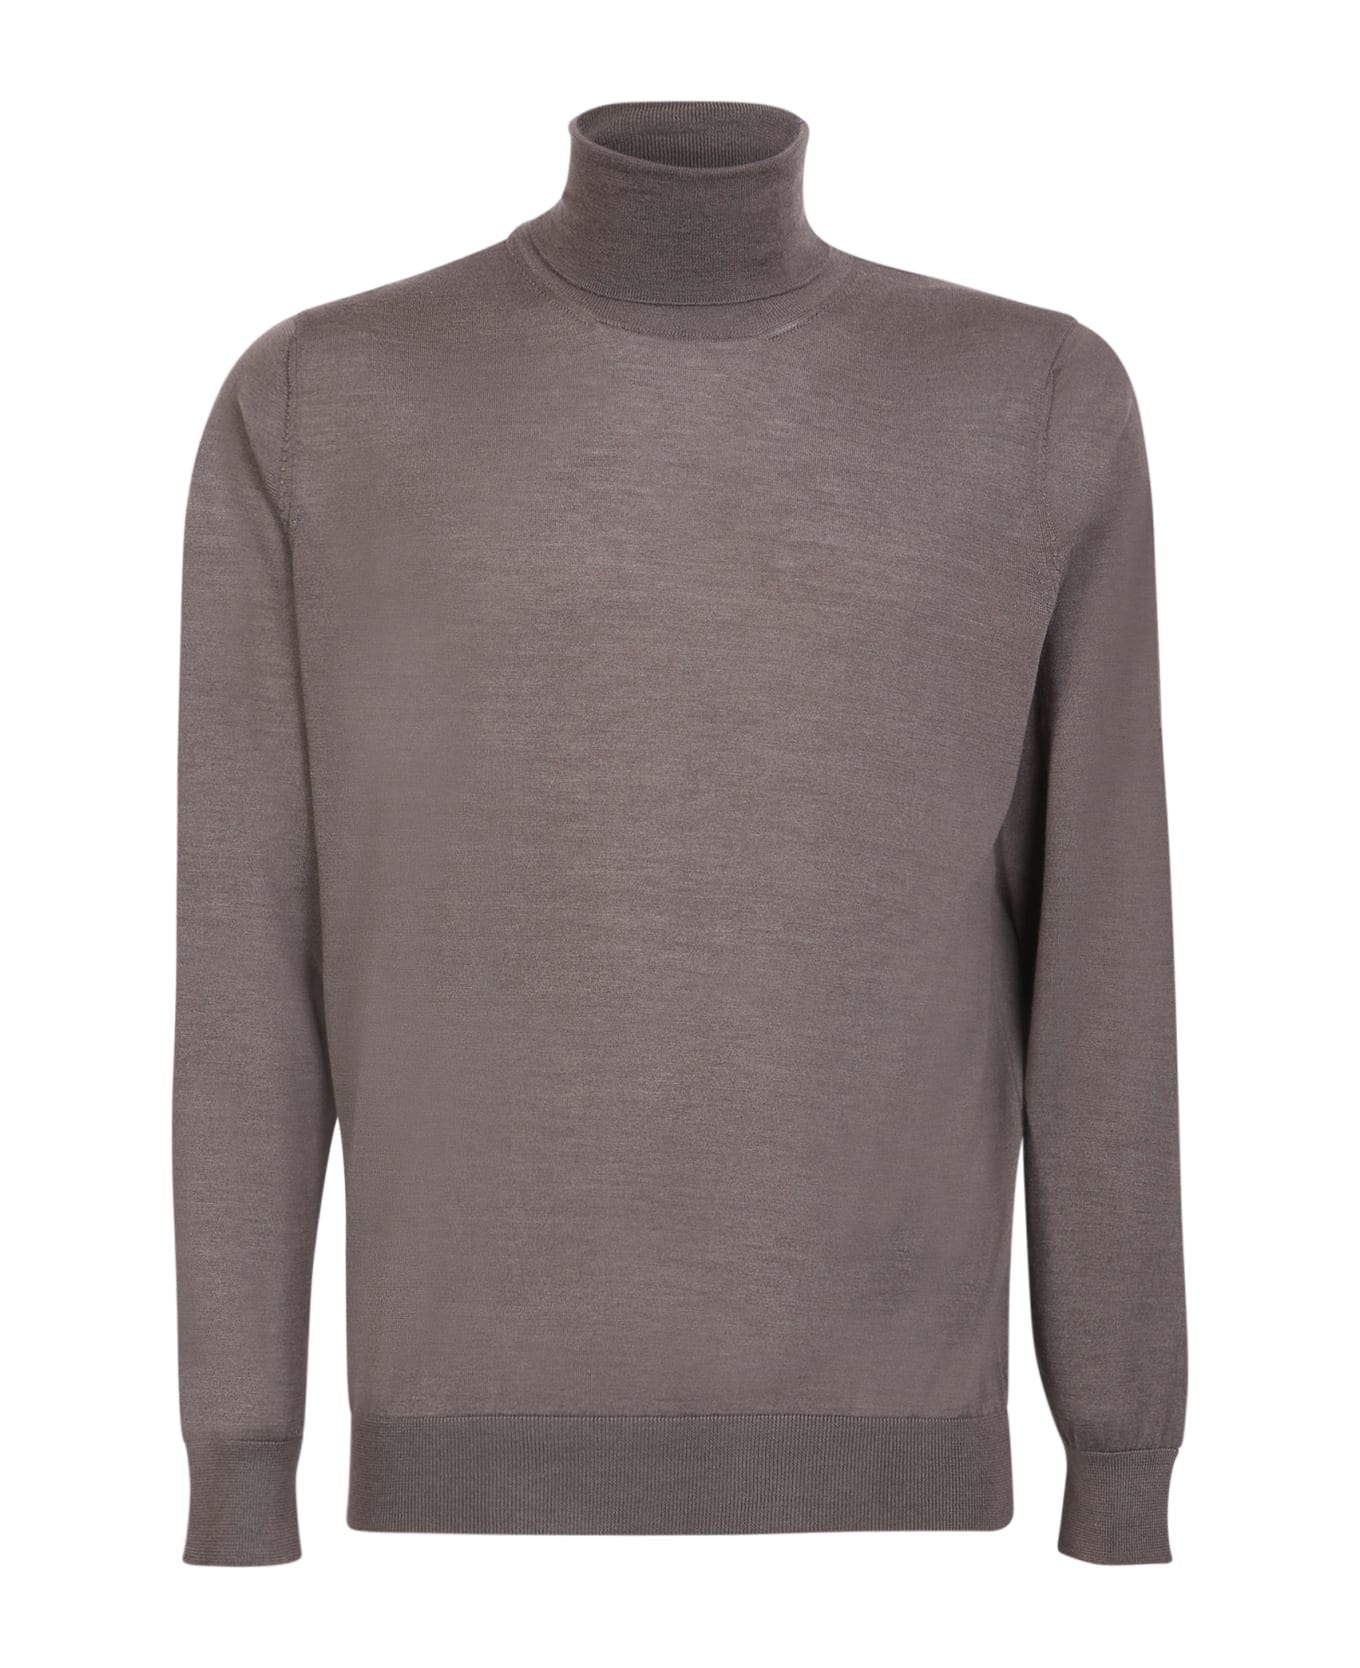 Colombo Beige Silk And Cashmere Sweater - Beige